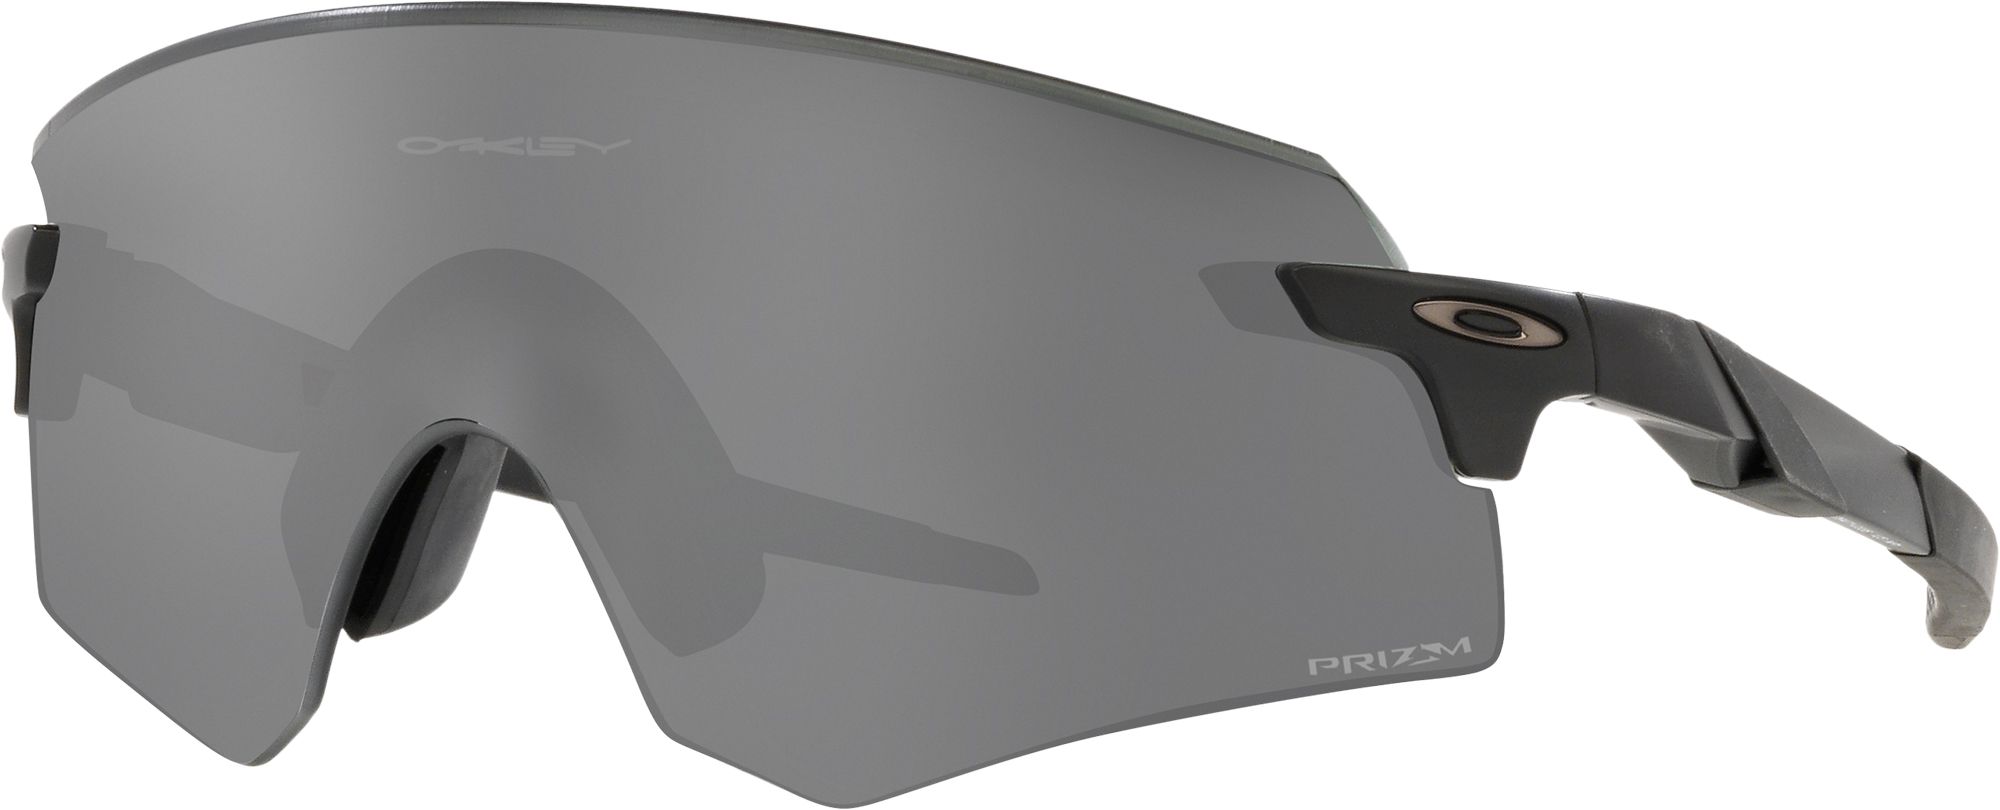 how much do oakleys cost